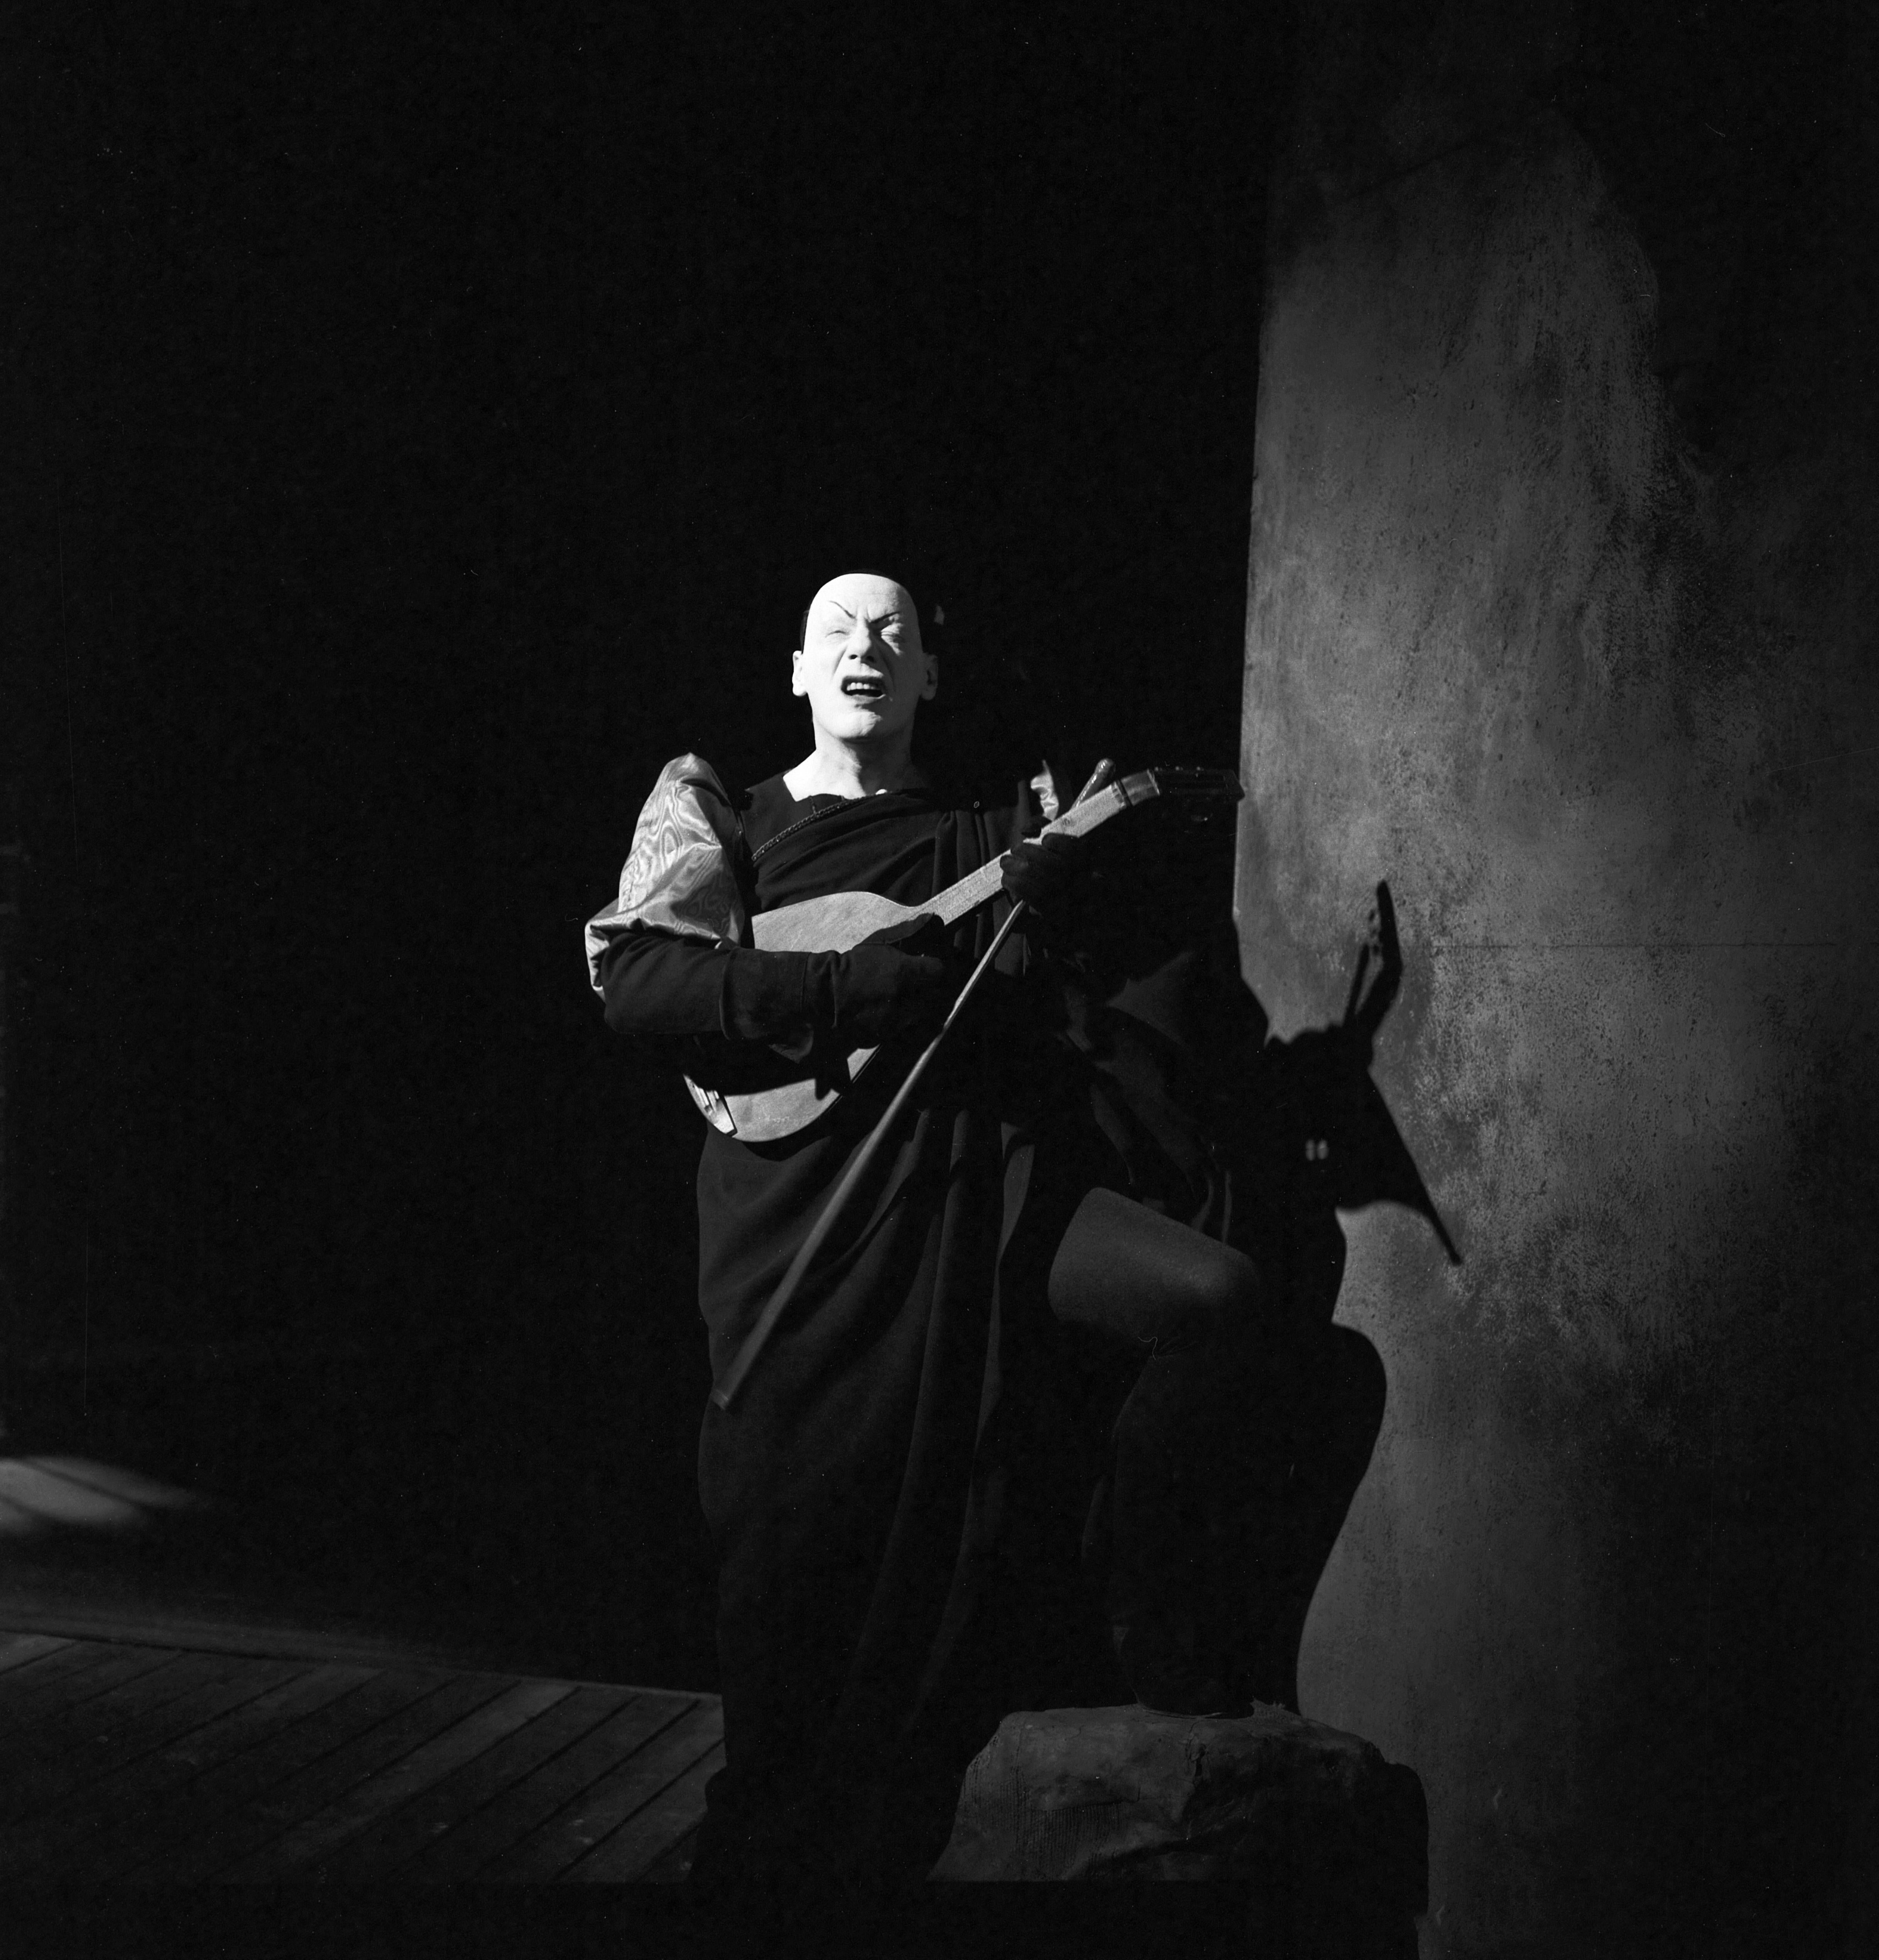 Sell your soul - Mephisto performing in Faust